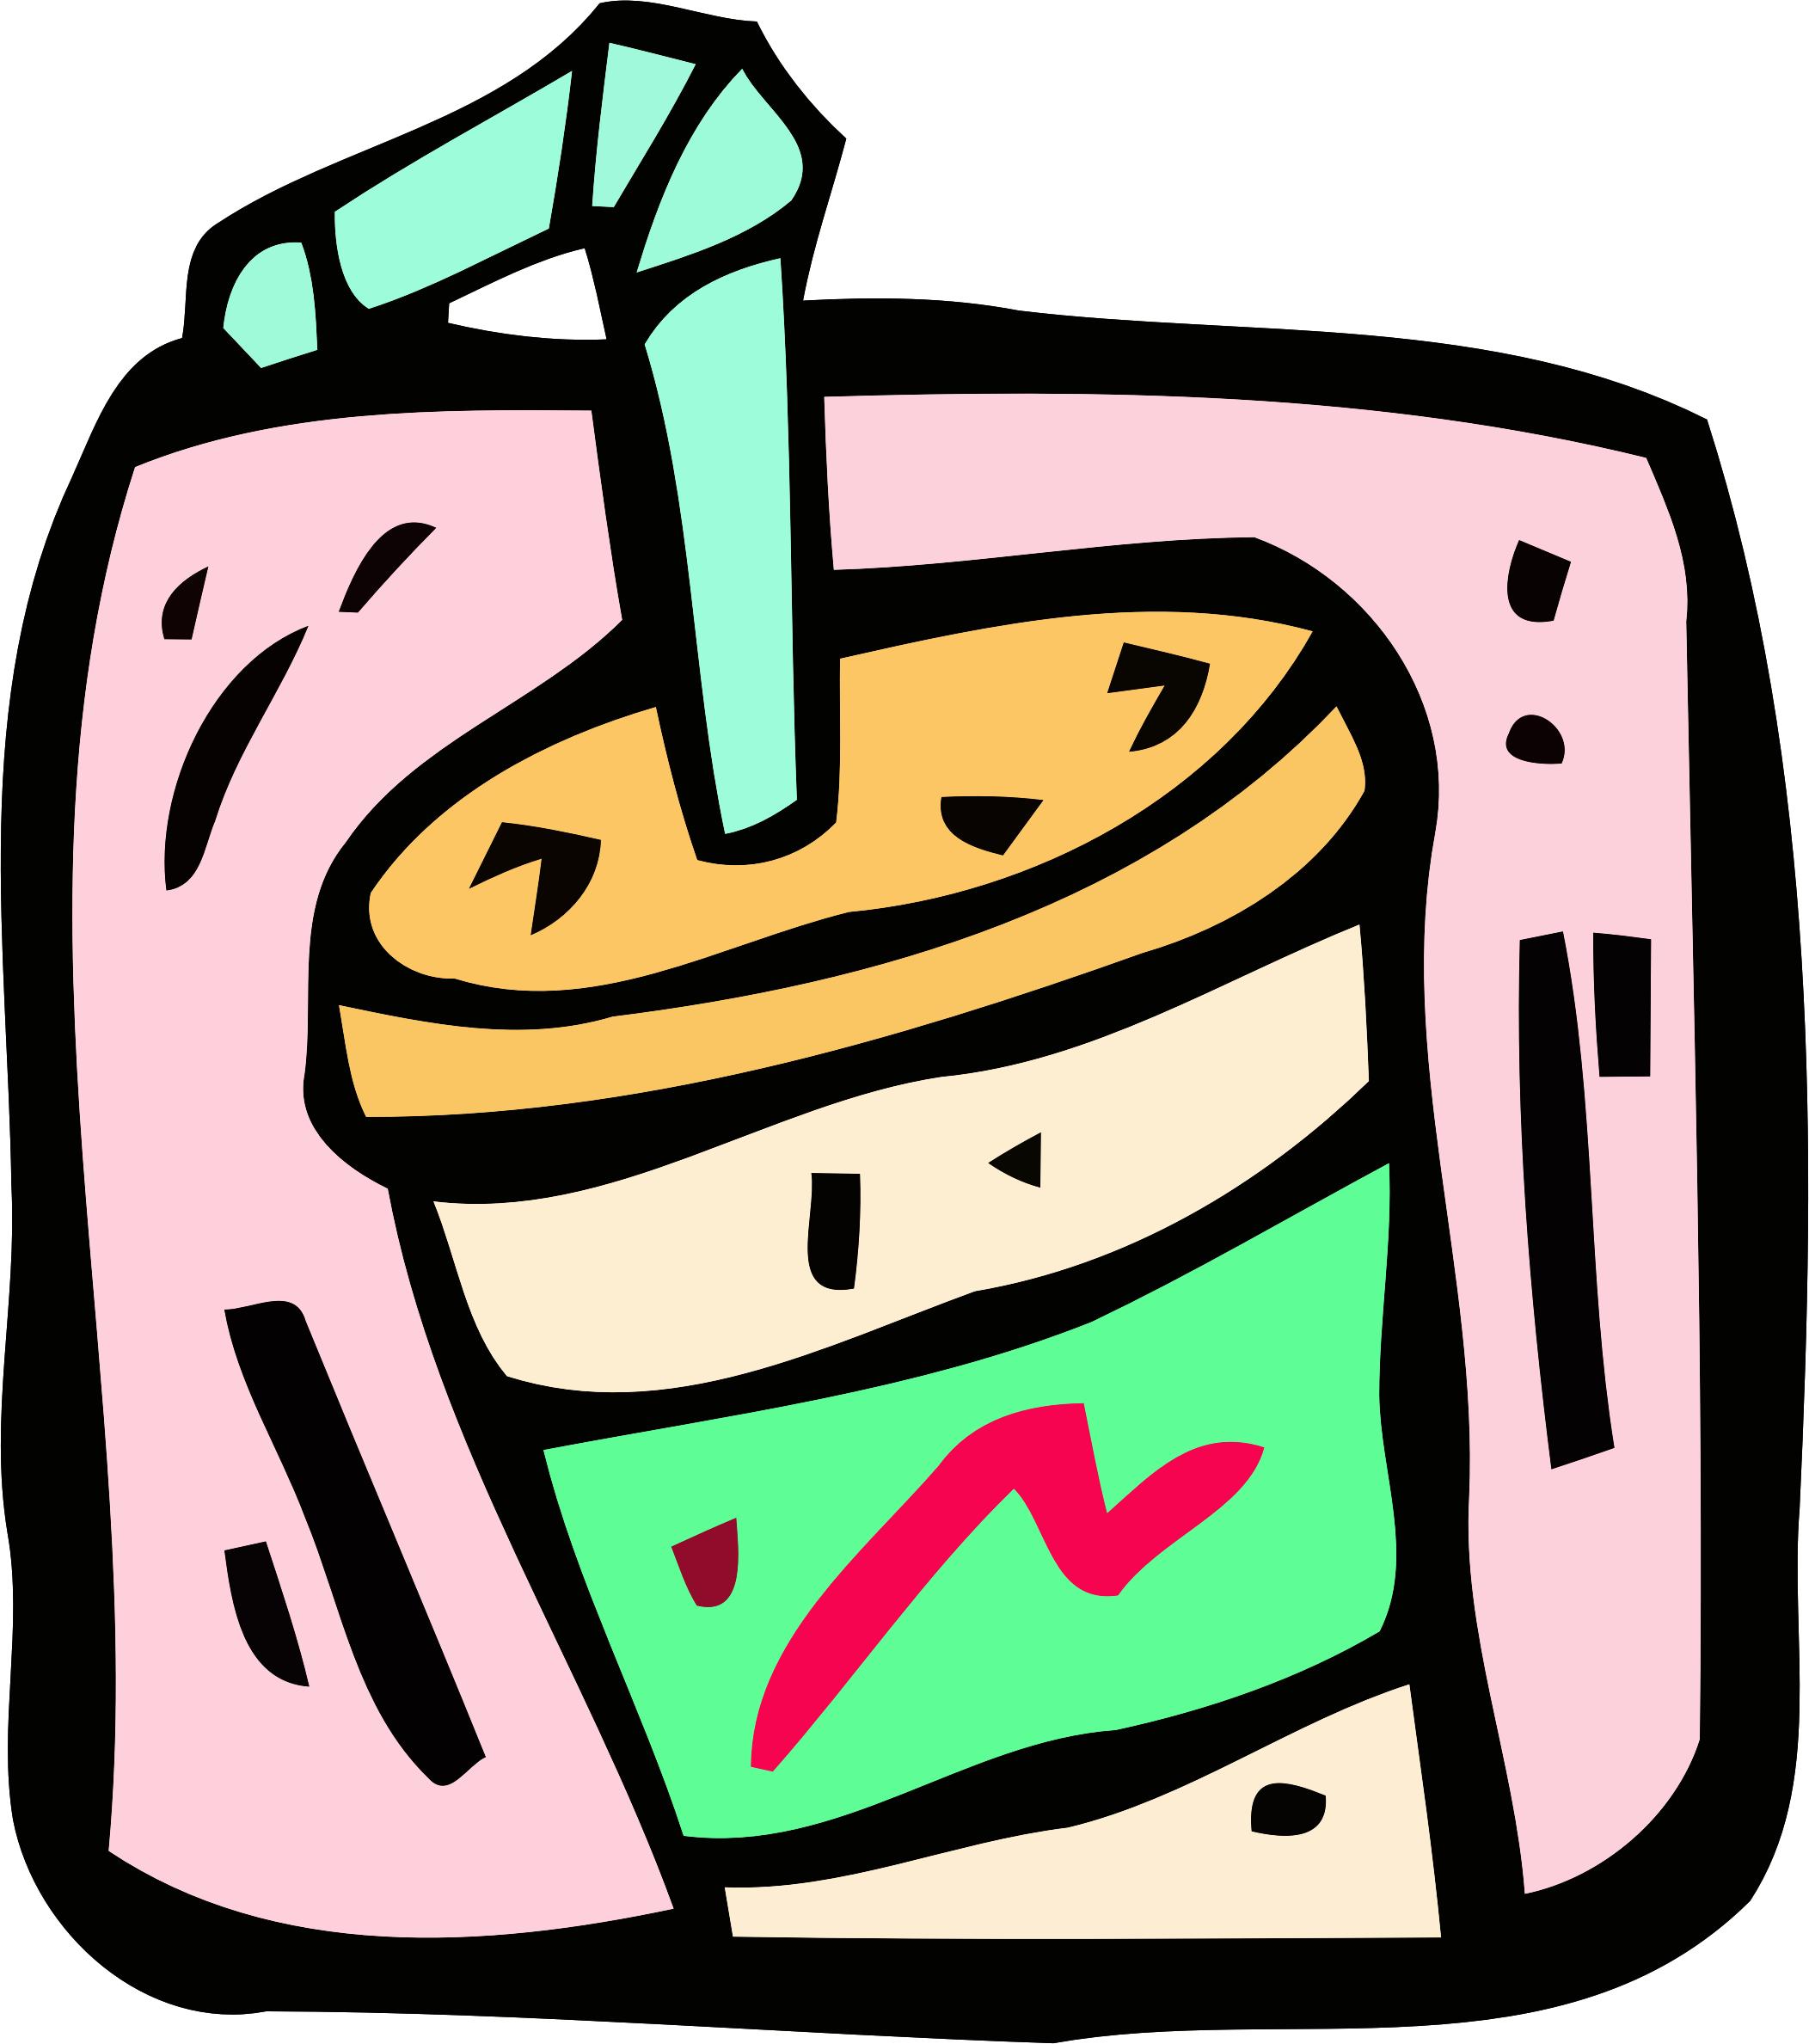 Food and drink icon - milkshake Icons PNG - Free PNG and Icons Downloads